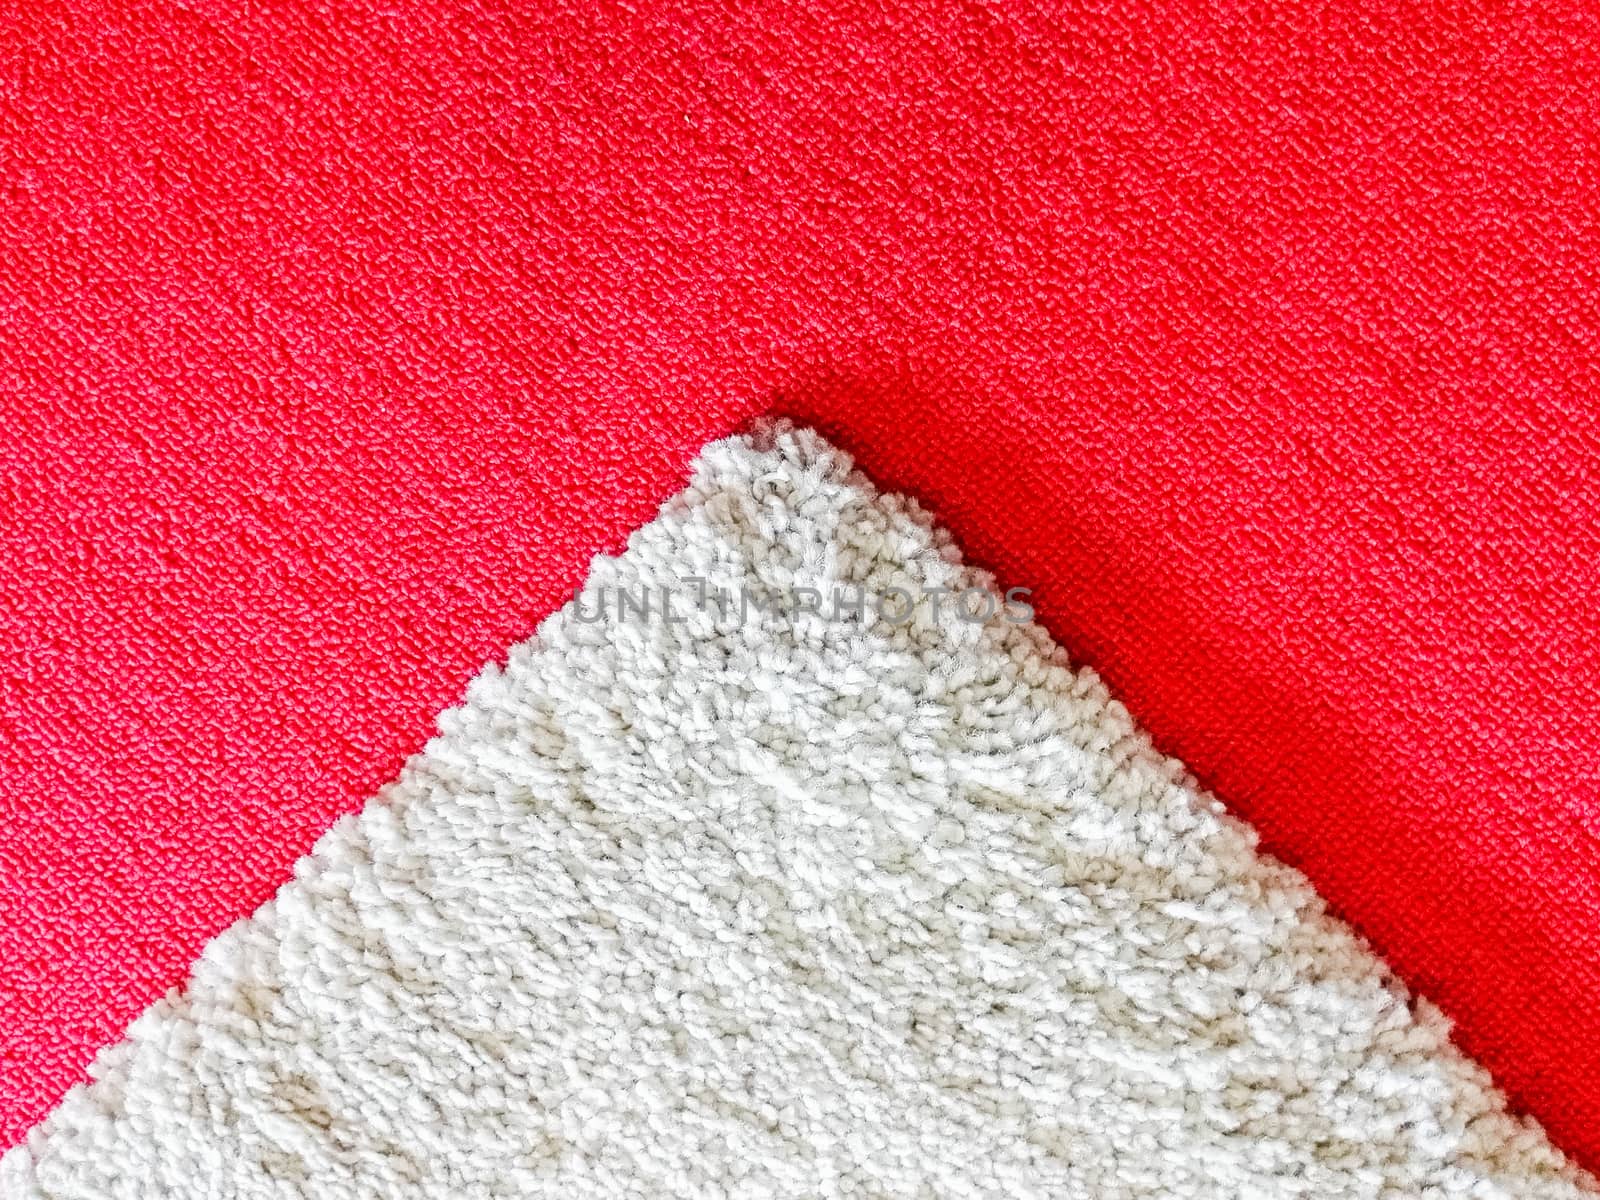 Red and white carpet in the room and office.